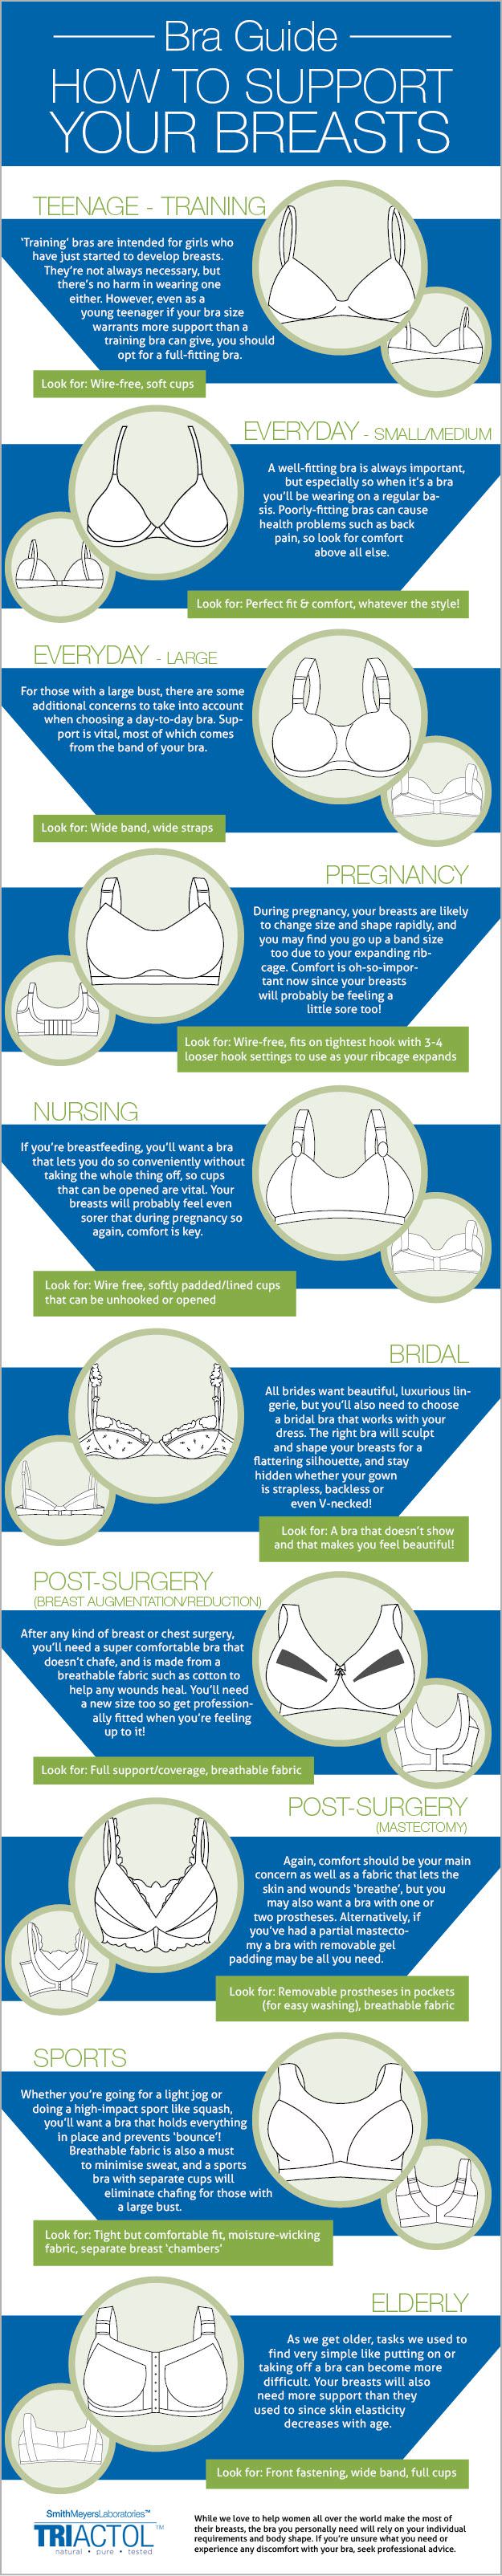 The Guide to Different Bras and Their Purposes